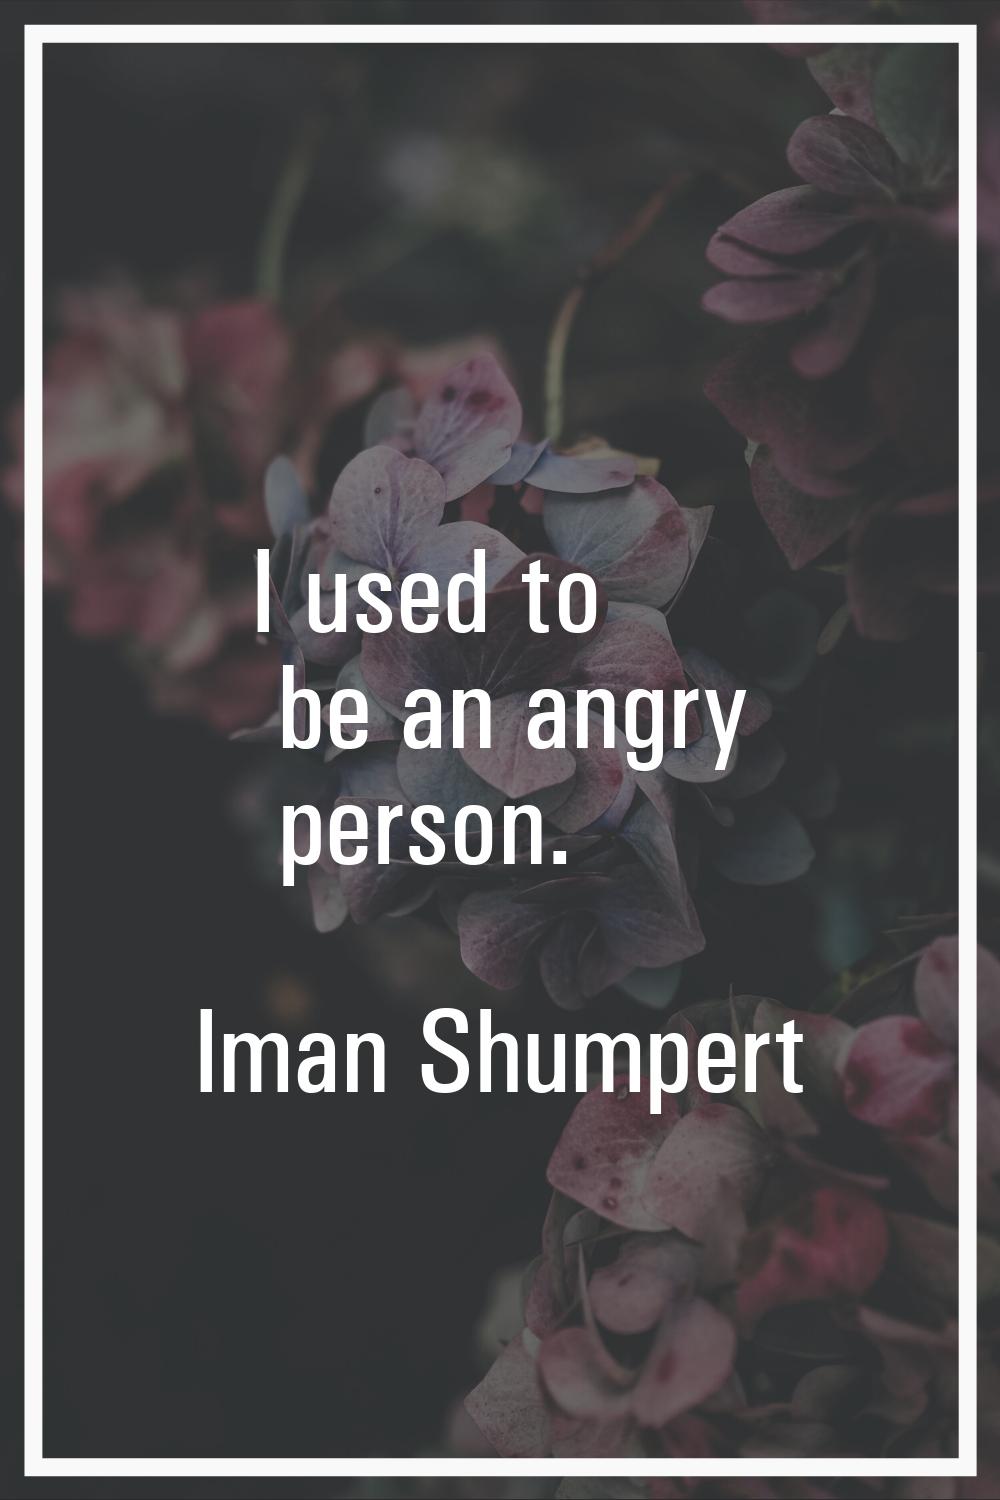 I used to be an angry person.